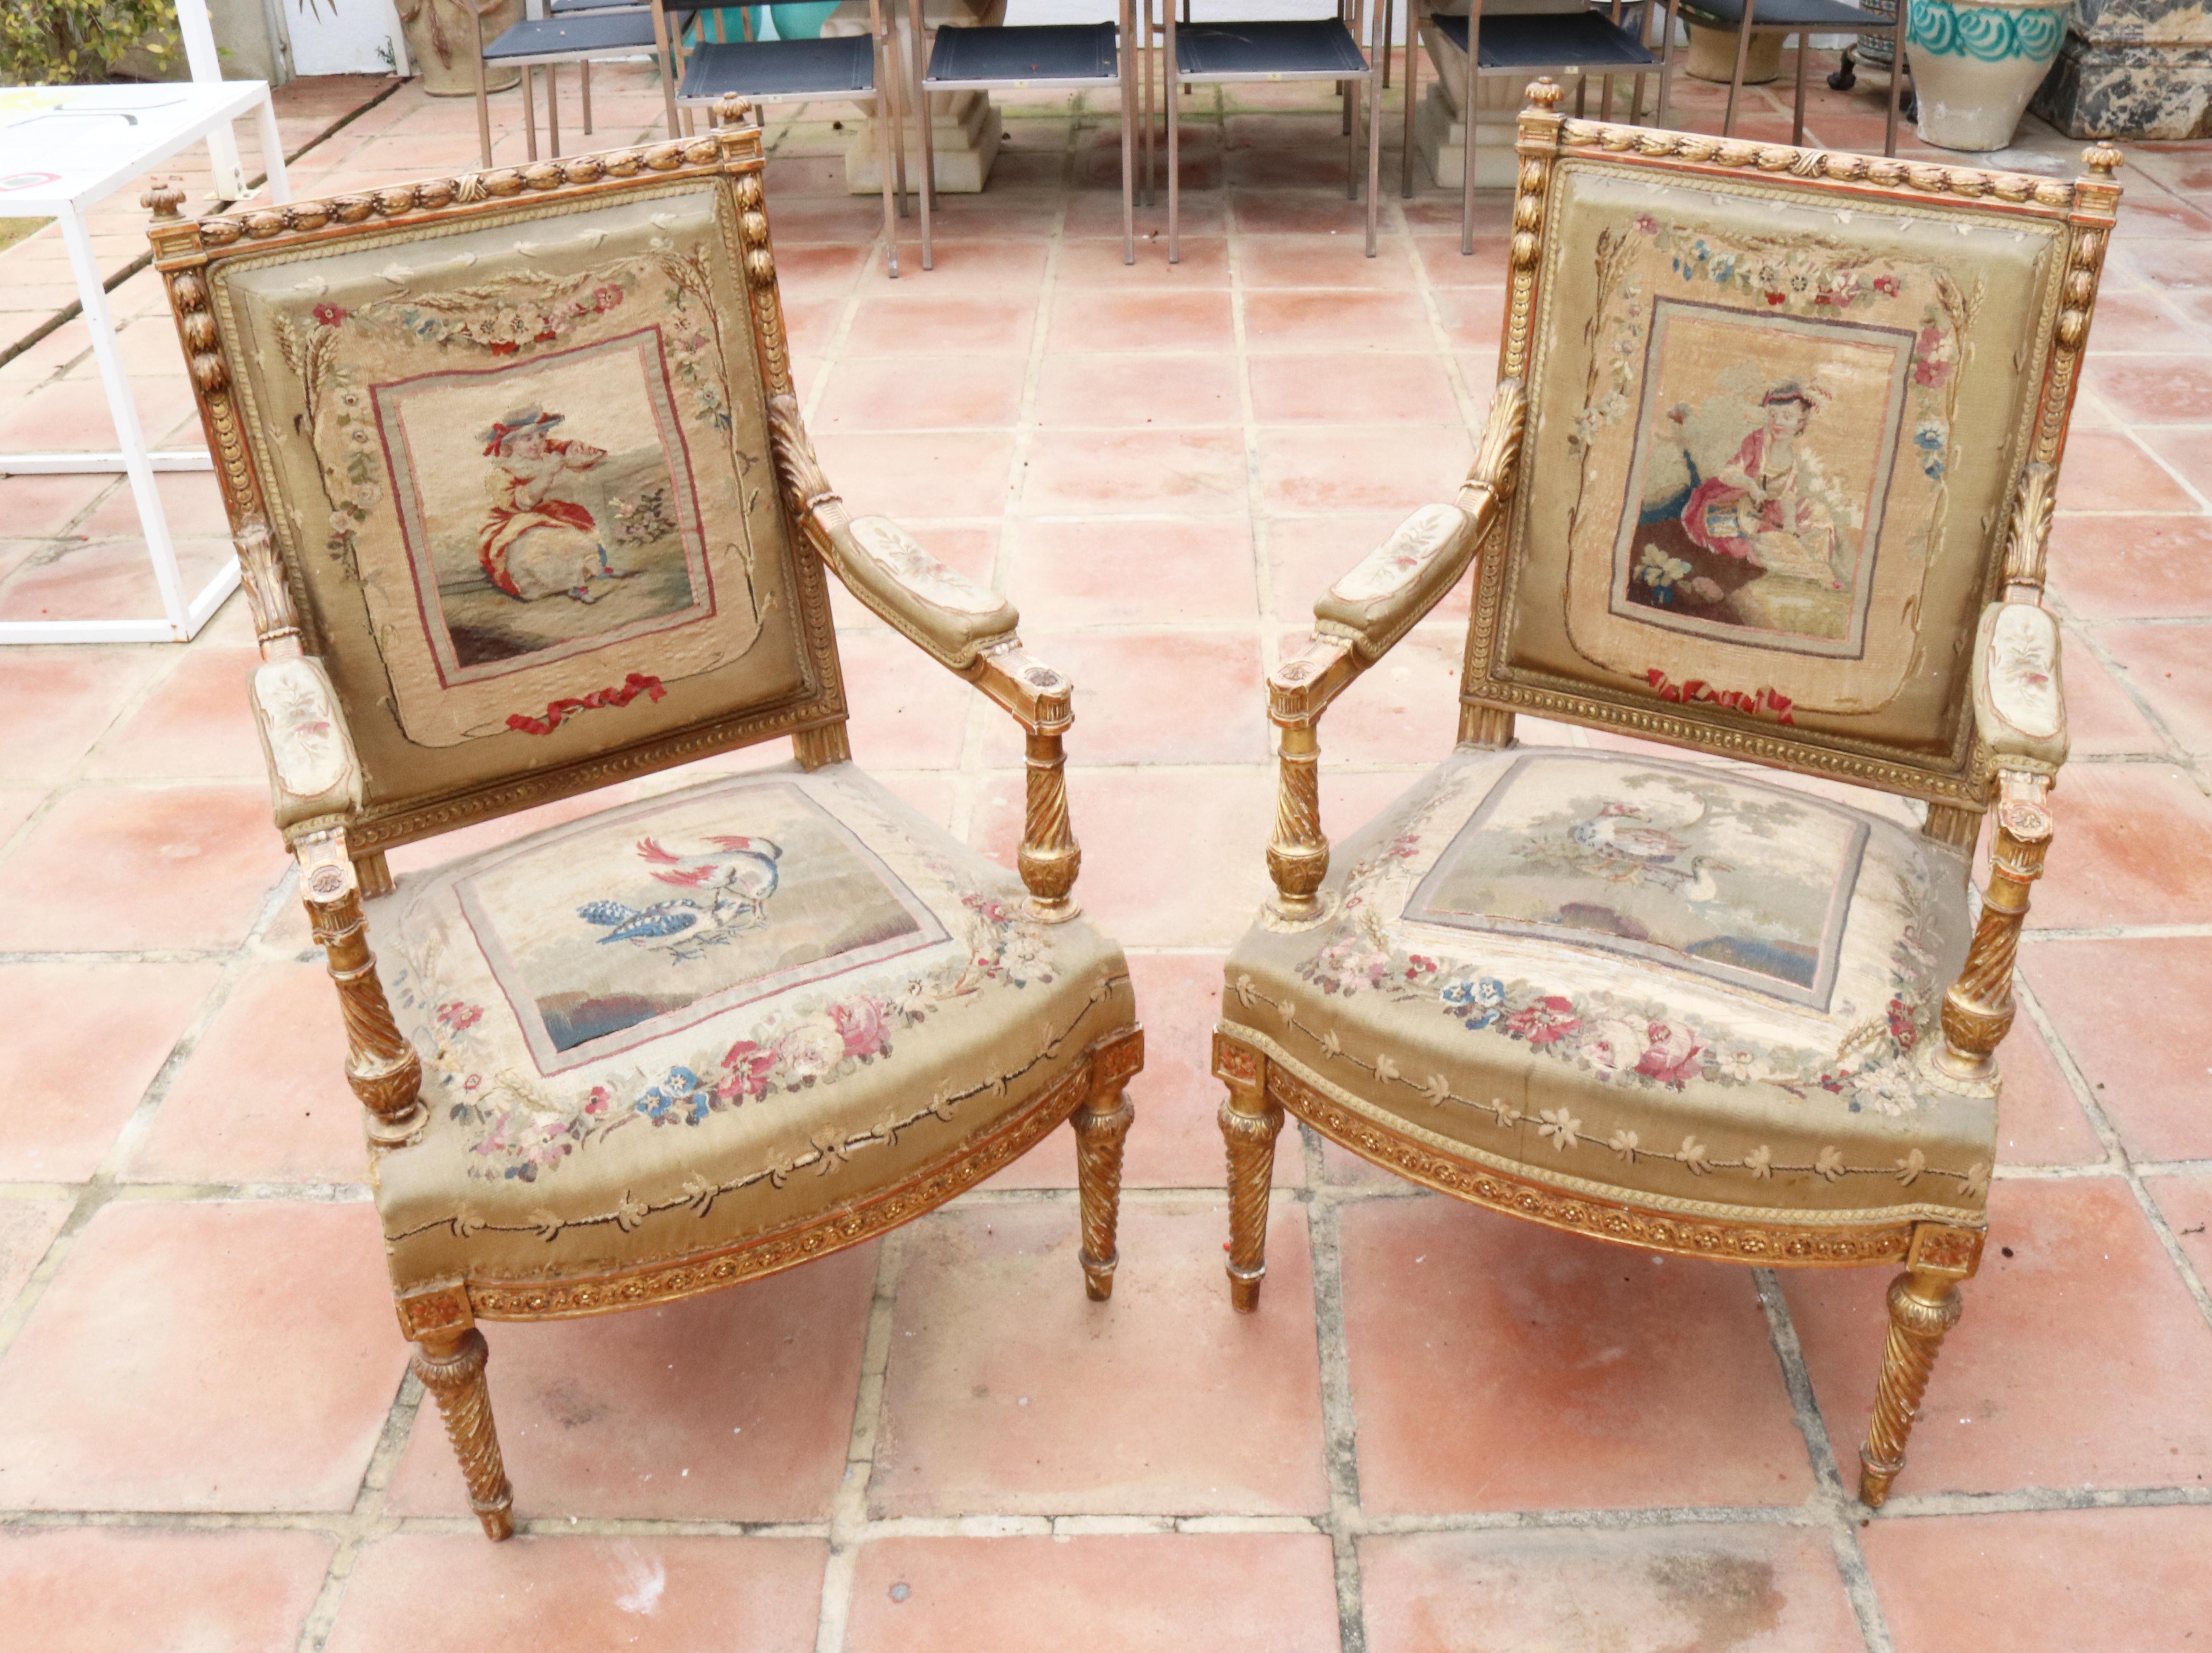 18th century pair of French Aubusson upholstered armchair with bird and people scenes, where the gold gilded wooden frame was replaced in the 19th century.

   